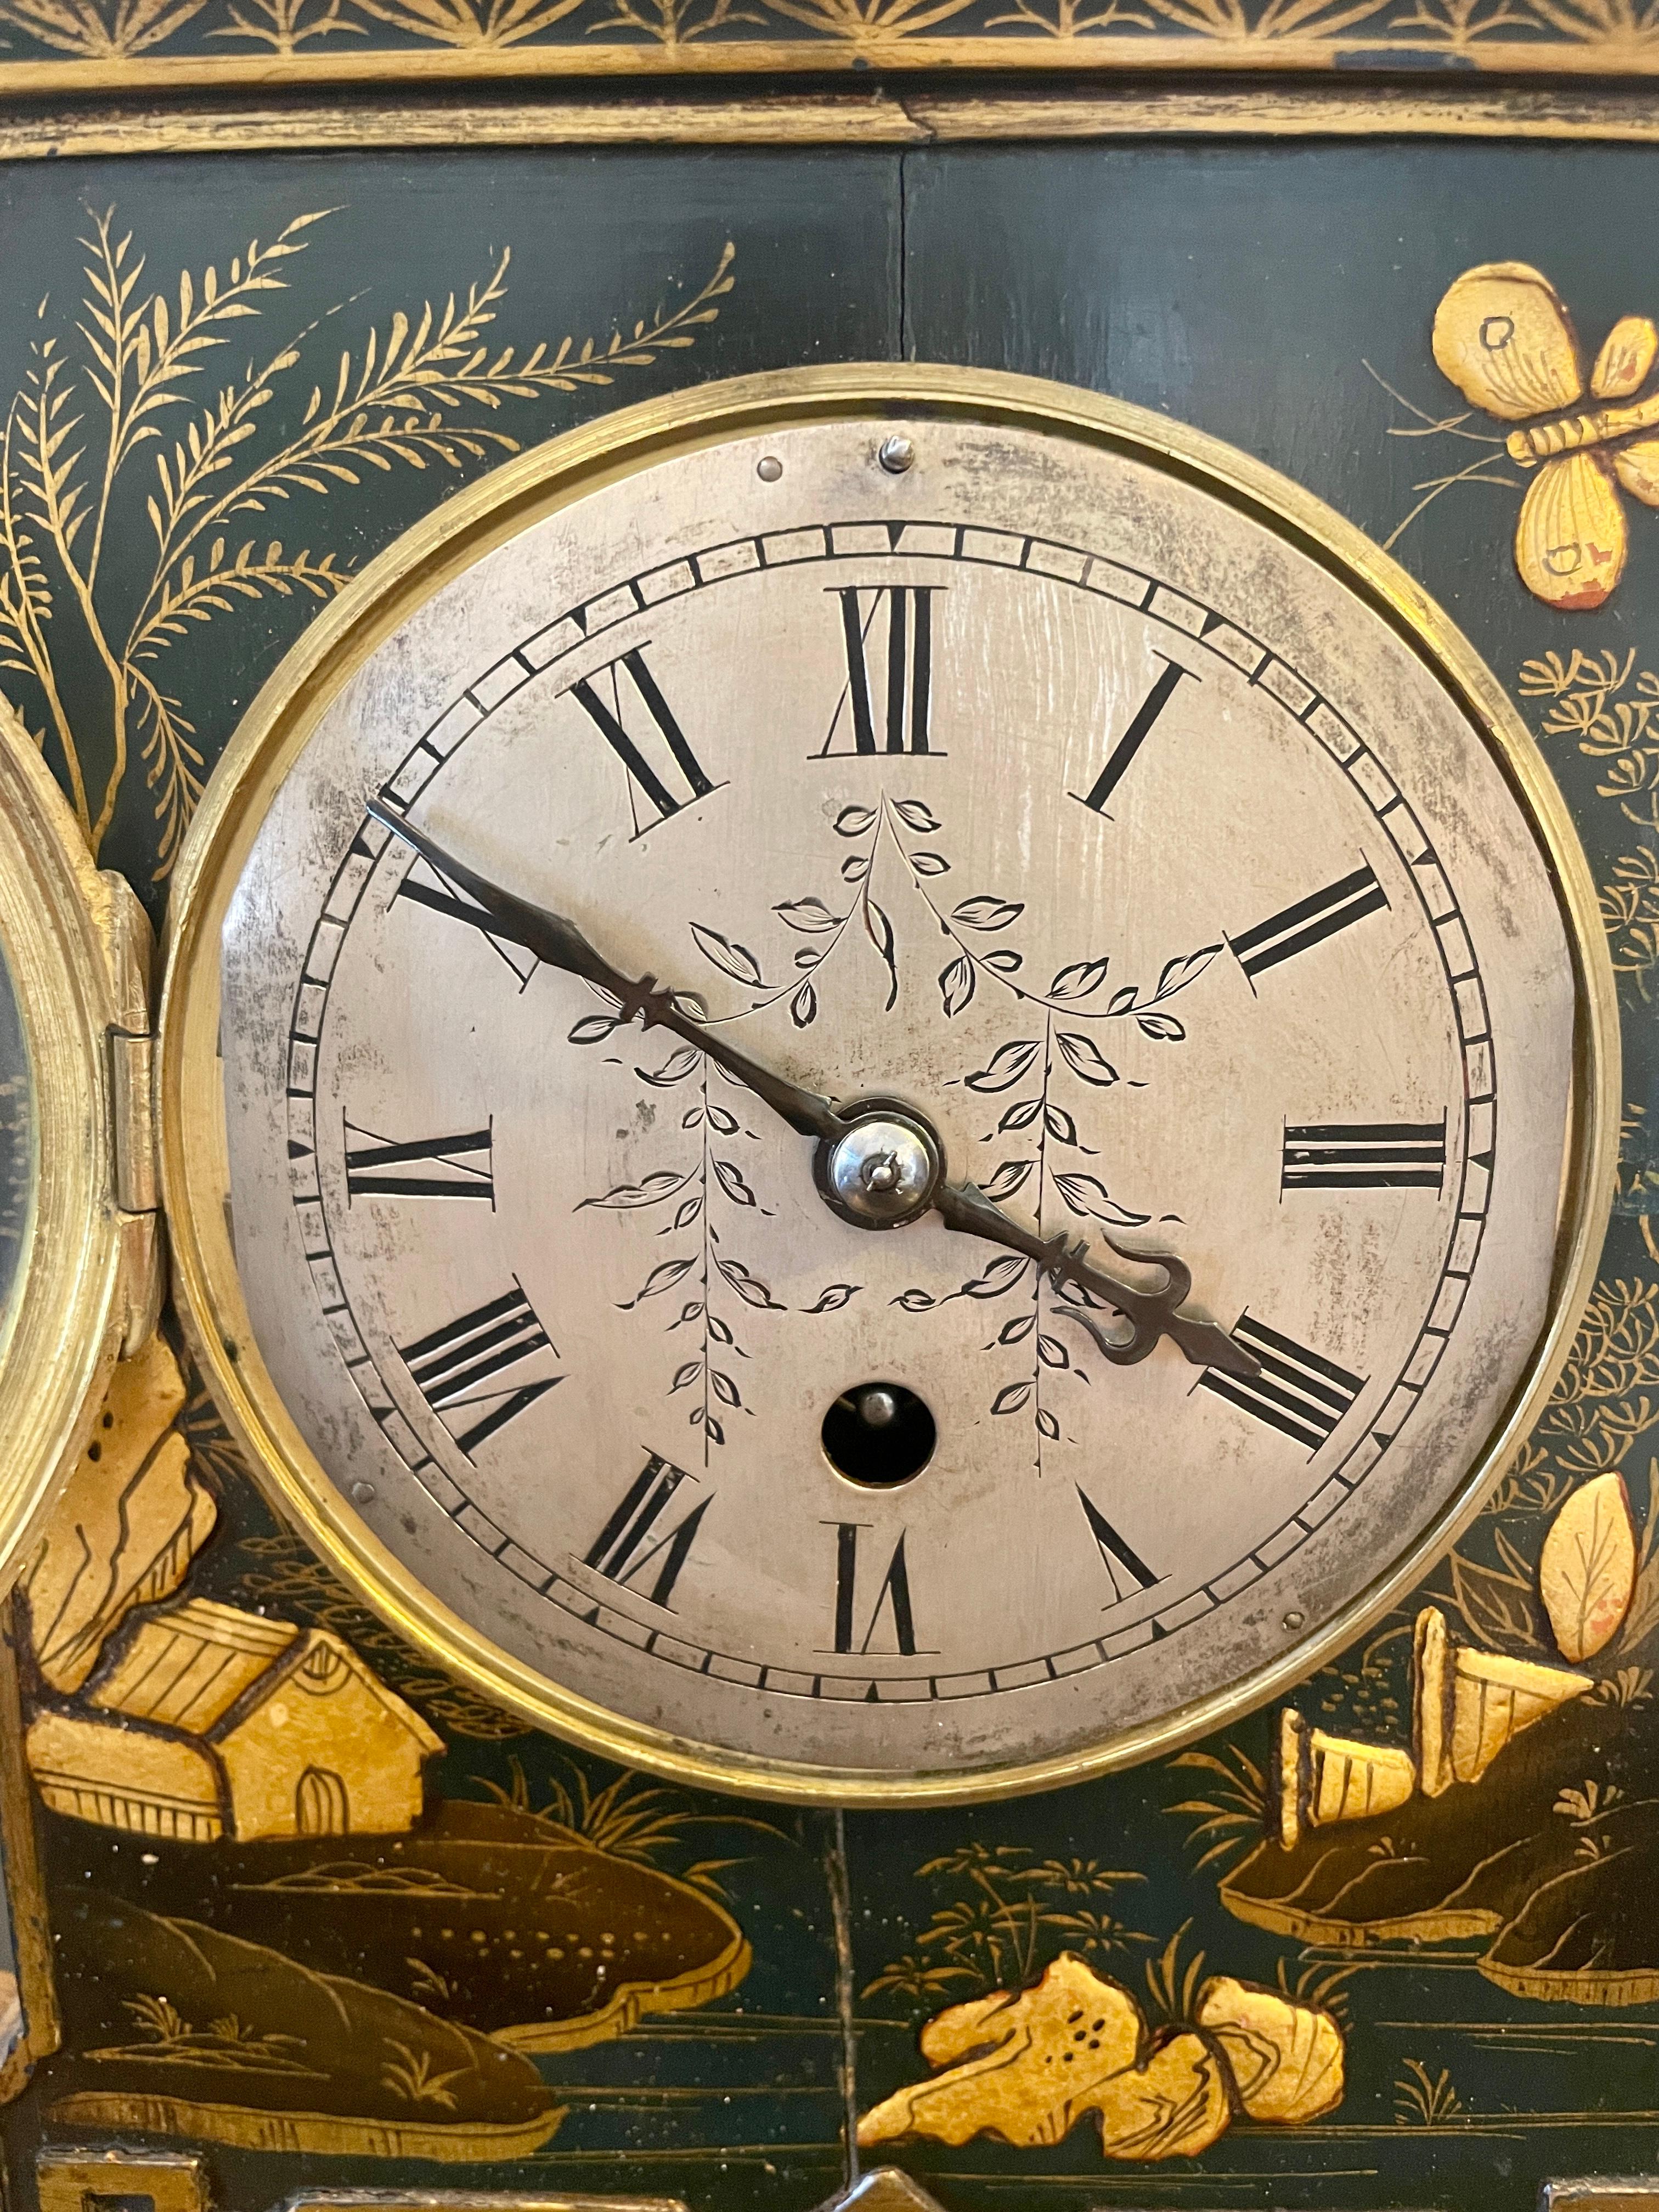 Quality antique Victorian chinoiserie decorated mantle clock by Japy Fréres
having a quality Chinese shaped pergola top above a circular silvered engraved dial with original hands and brass bezel, 8 day French movement in a quality green and gold